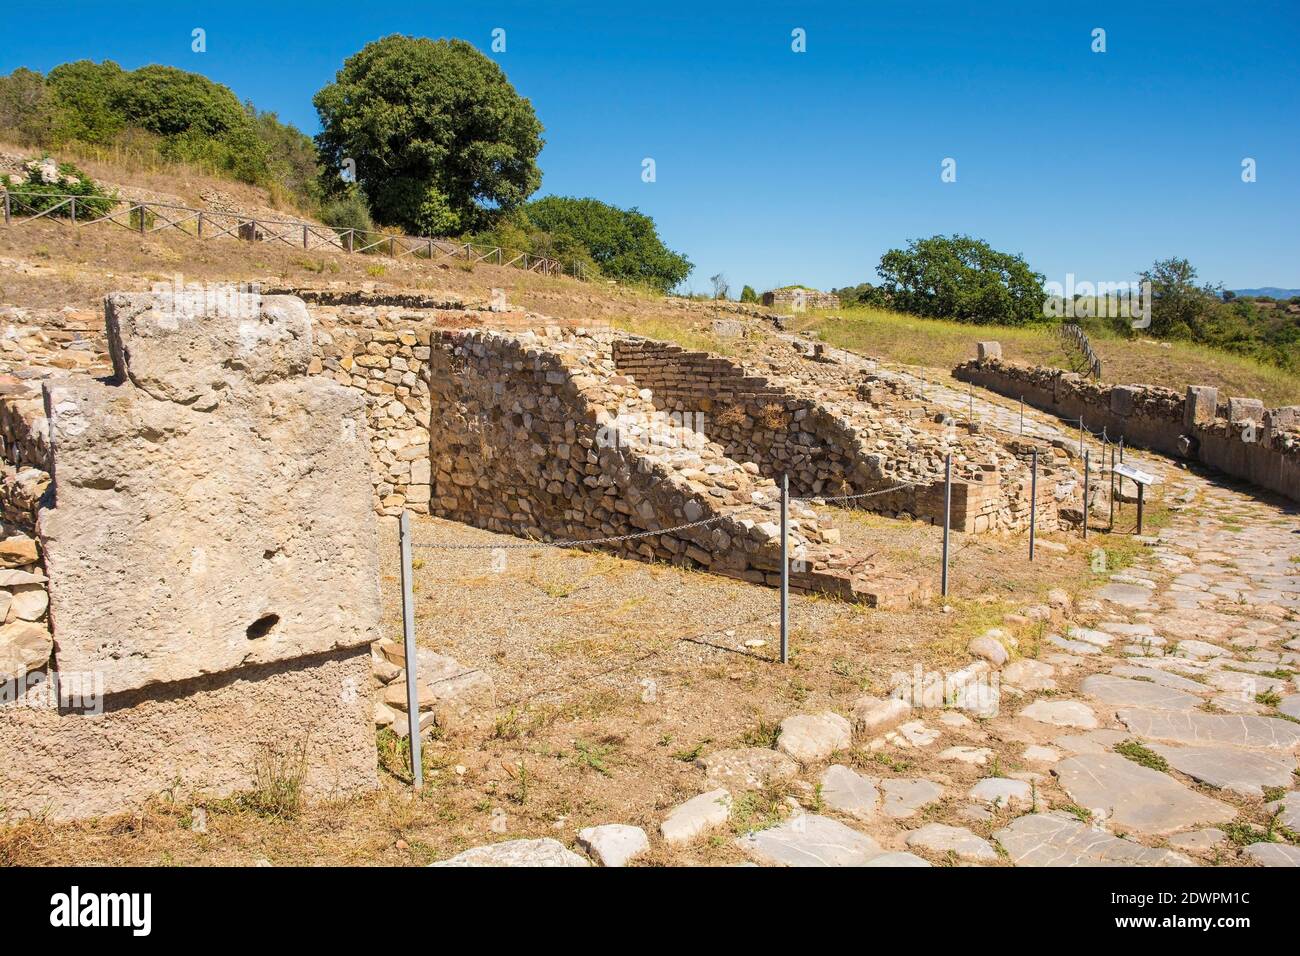 Grosseto, Italy - September 4th 2020. The ruins of Roman era workshops in Roselle or Rusellae, an ancient Etruscan and Roman city in Tuscany Stock Photo